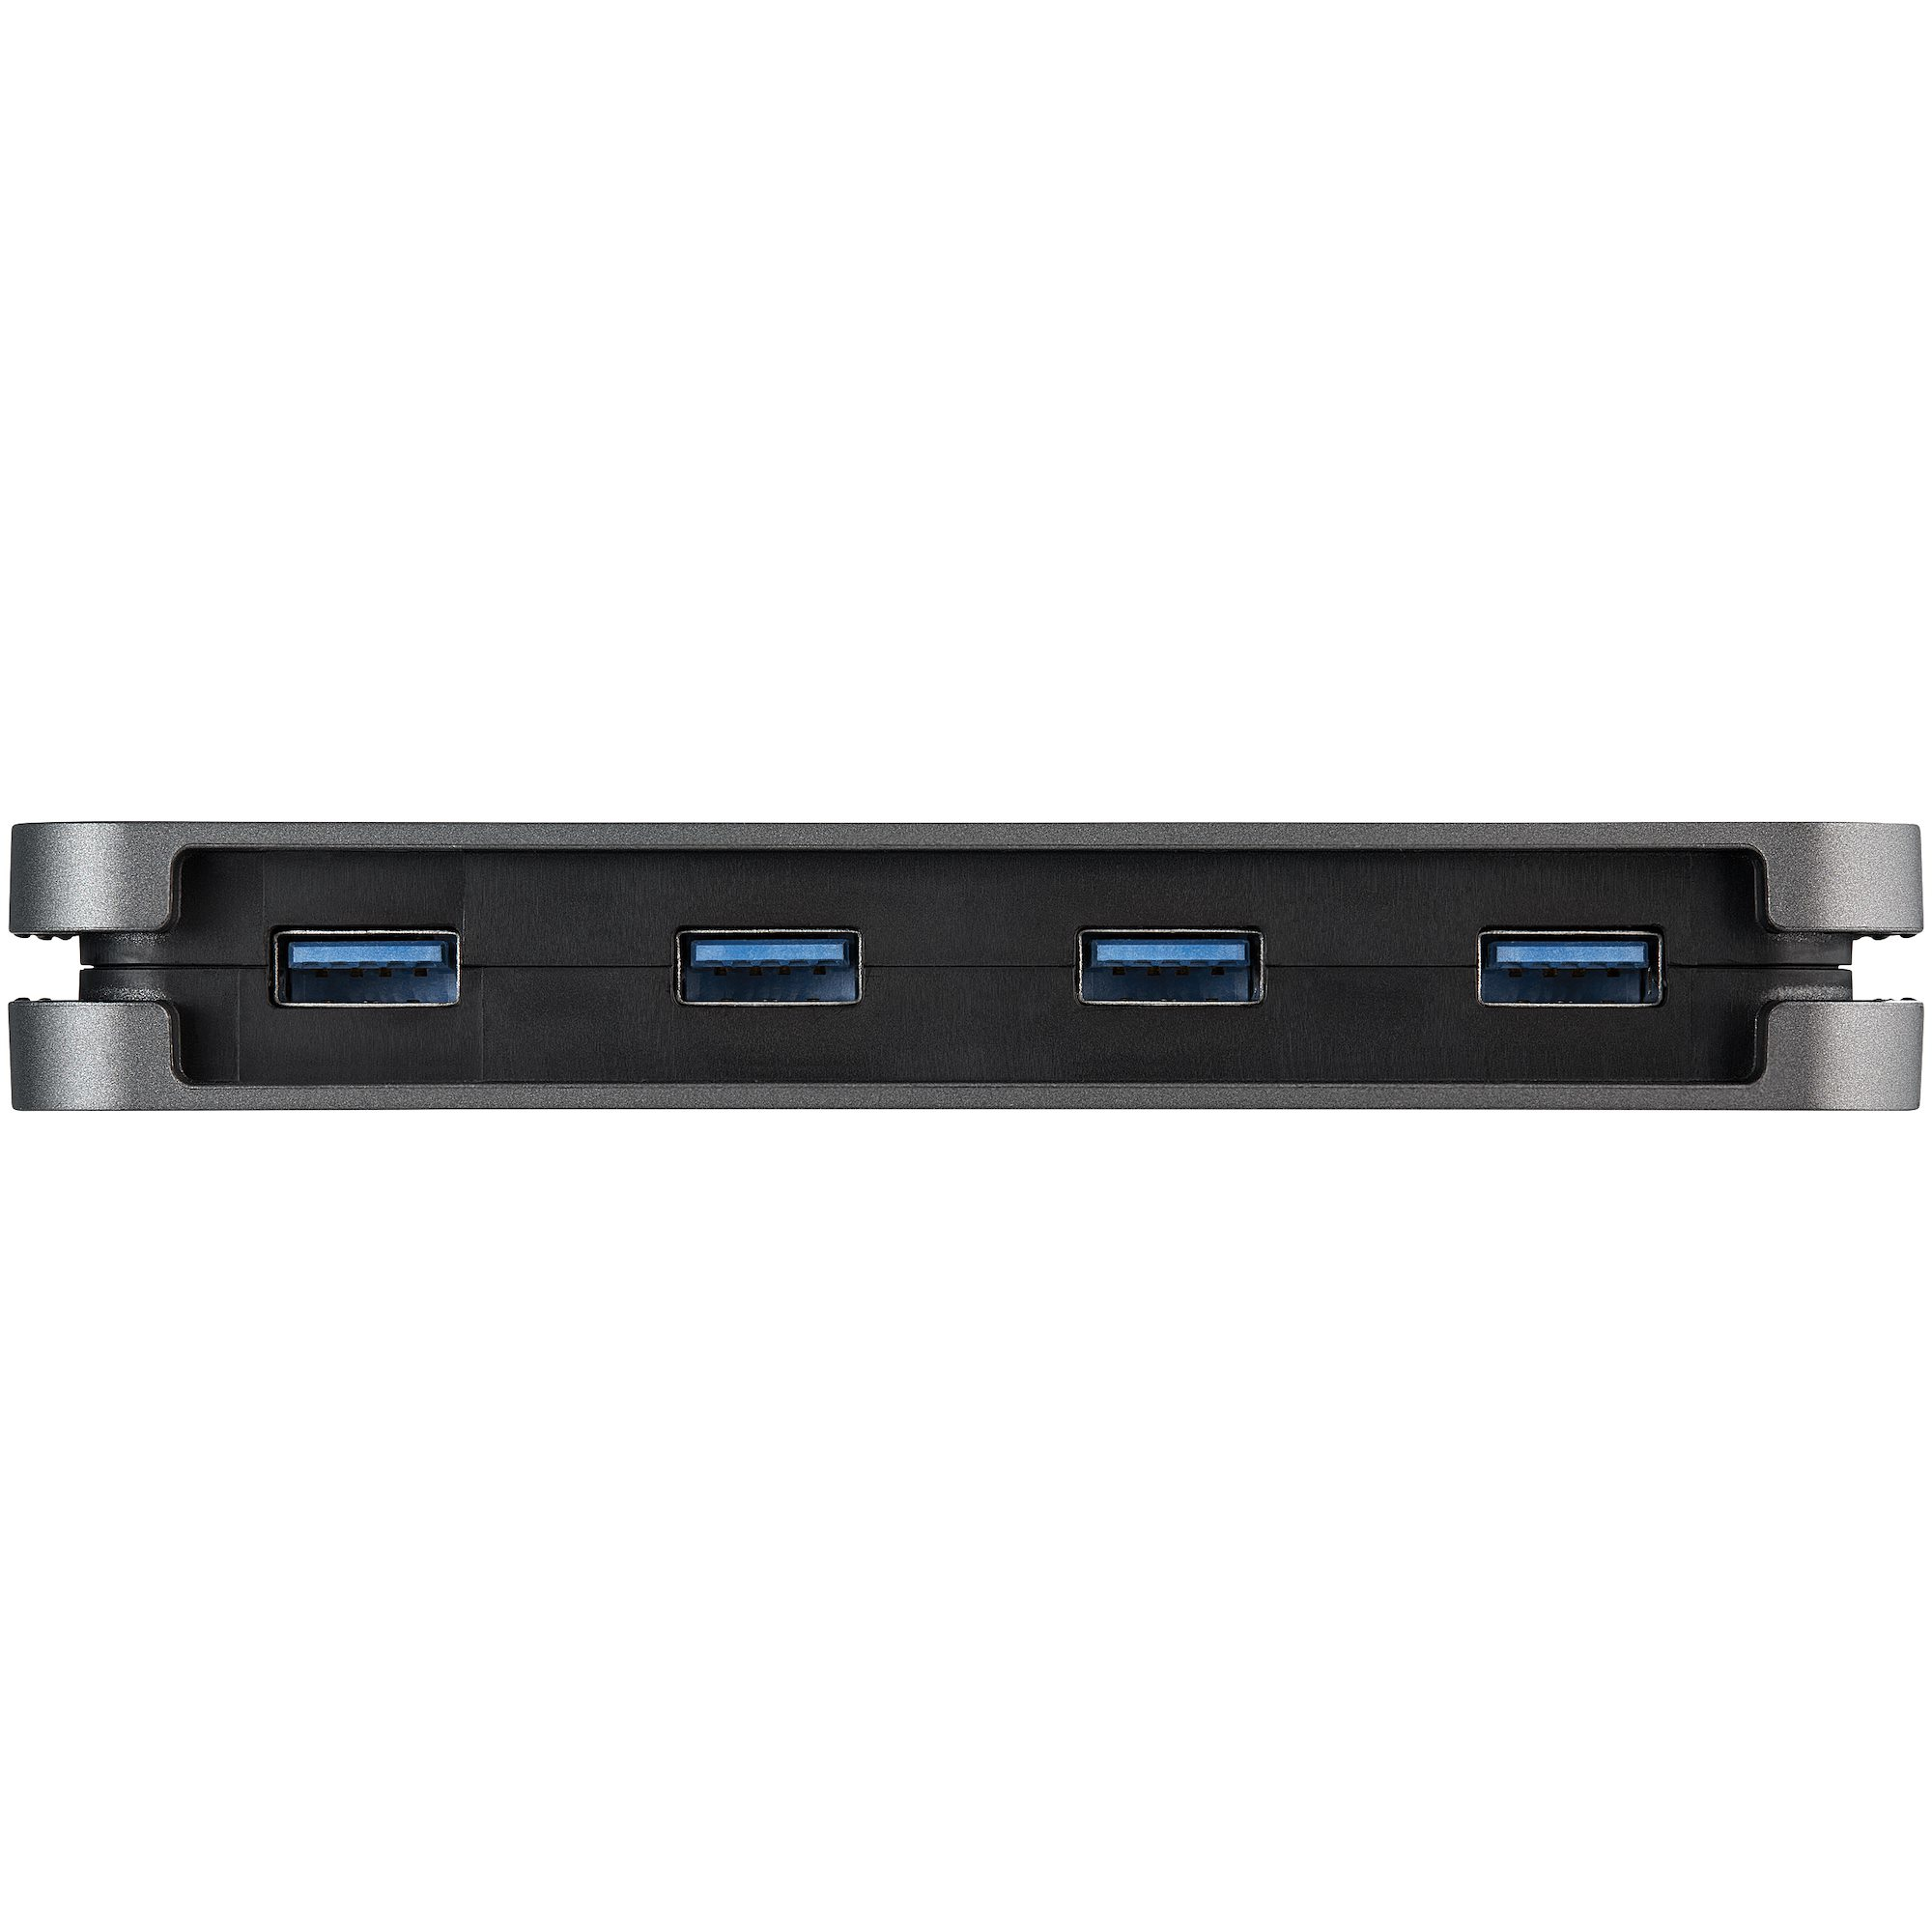 StarTech.com ~4 Port USB C Hub - 4x USB-A - USB 3.0 Type-C Hub - USB 3.2 Gen 1 (5Gbps) - Bus Powered Portable USB-C to USB-A Adapter Laptop Hub - 11.2" (28.5cm) Cable w/ Cable Management